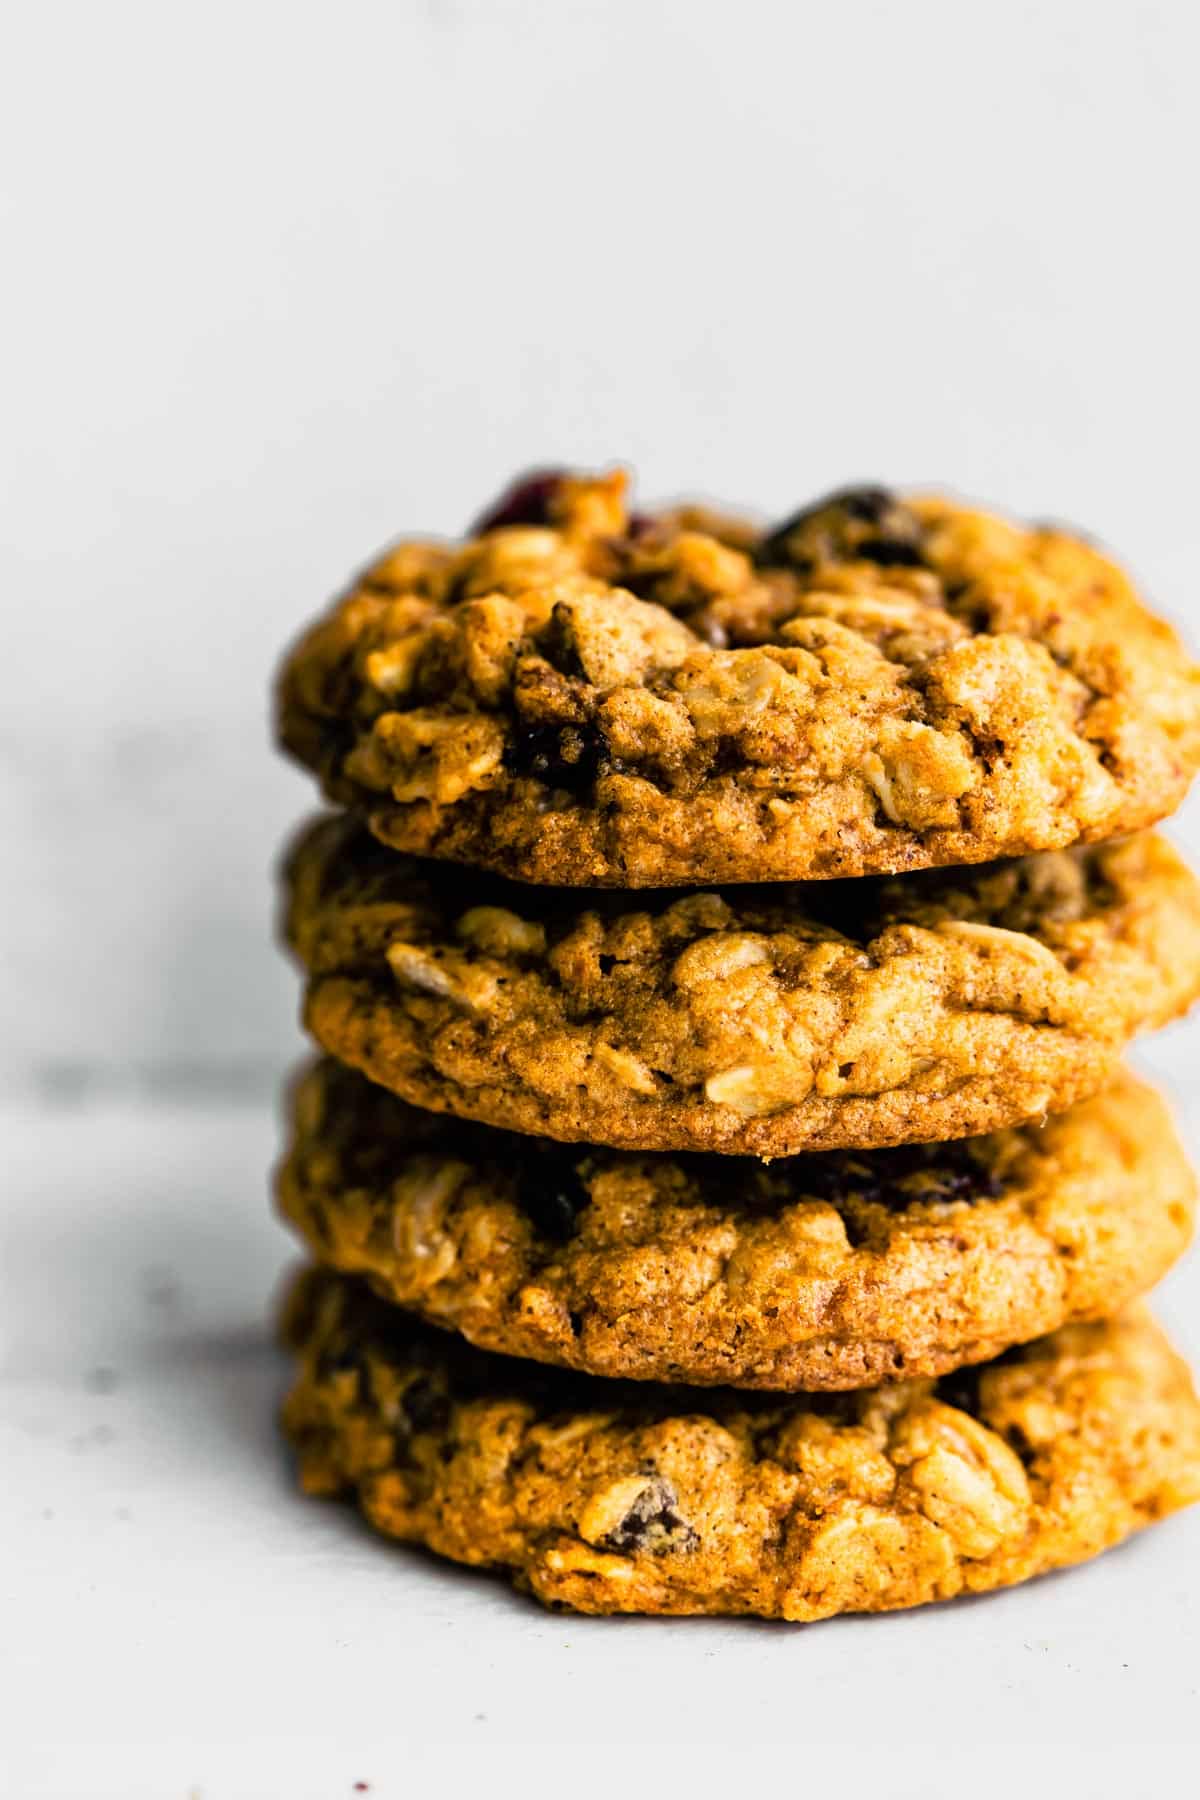 A stack of four gluten free oatmeal cookies with chocolate chips on a white countertop.